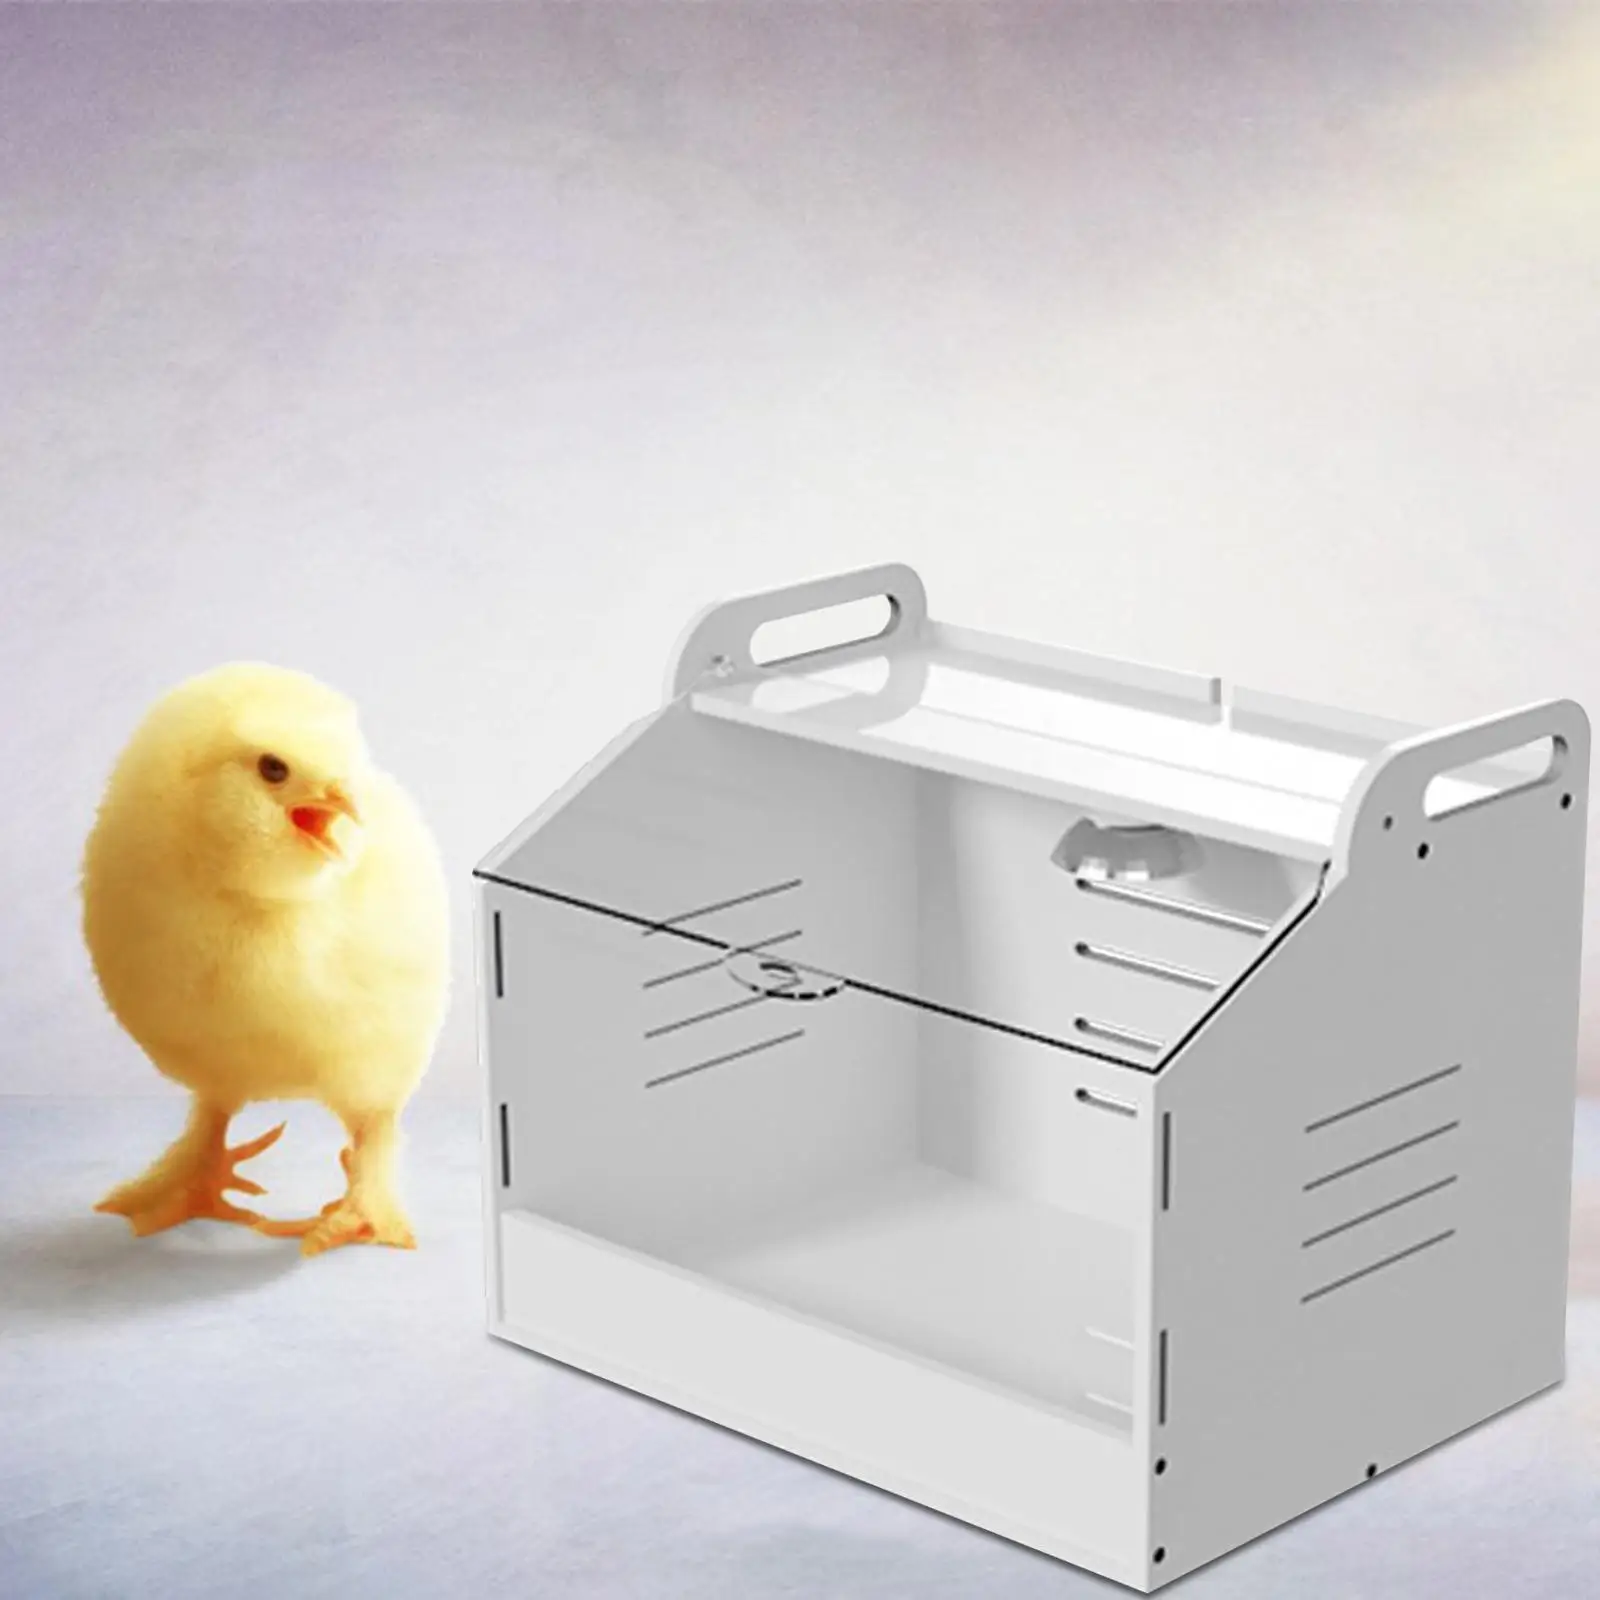 Egg Incubator Hatching Flame Retardant Poultry Farm Equipment Automatic Poultry Hatcher Machine for Duck Eggs Chicken Bird Quail